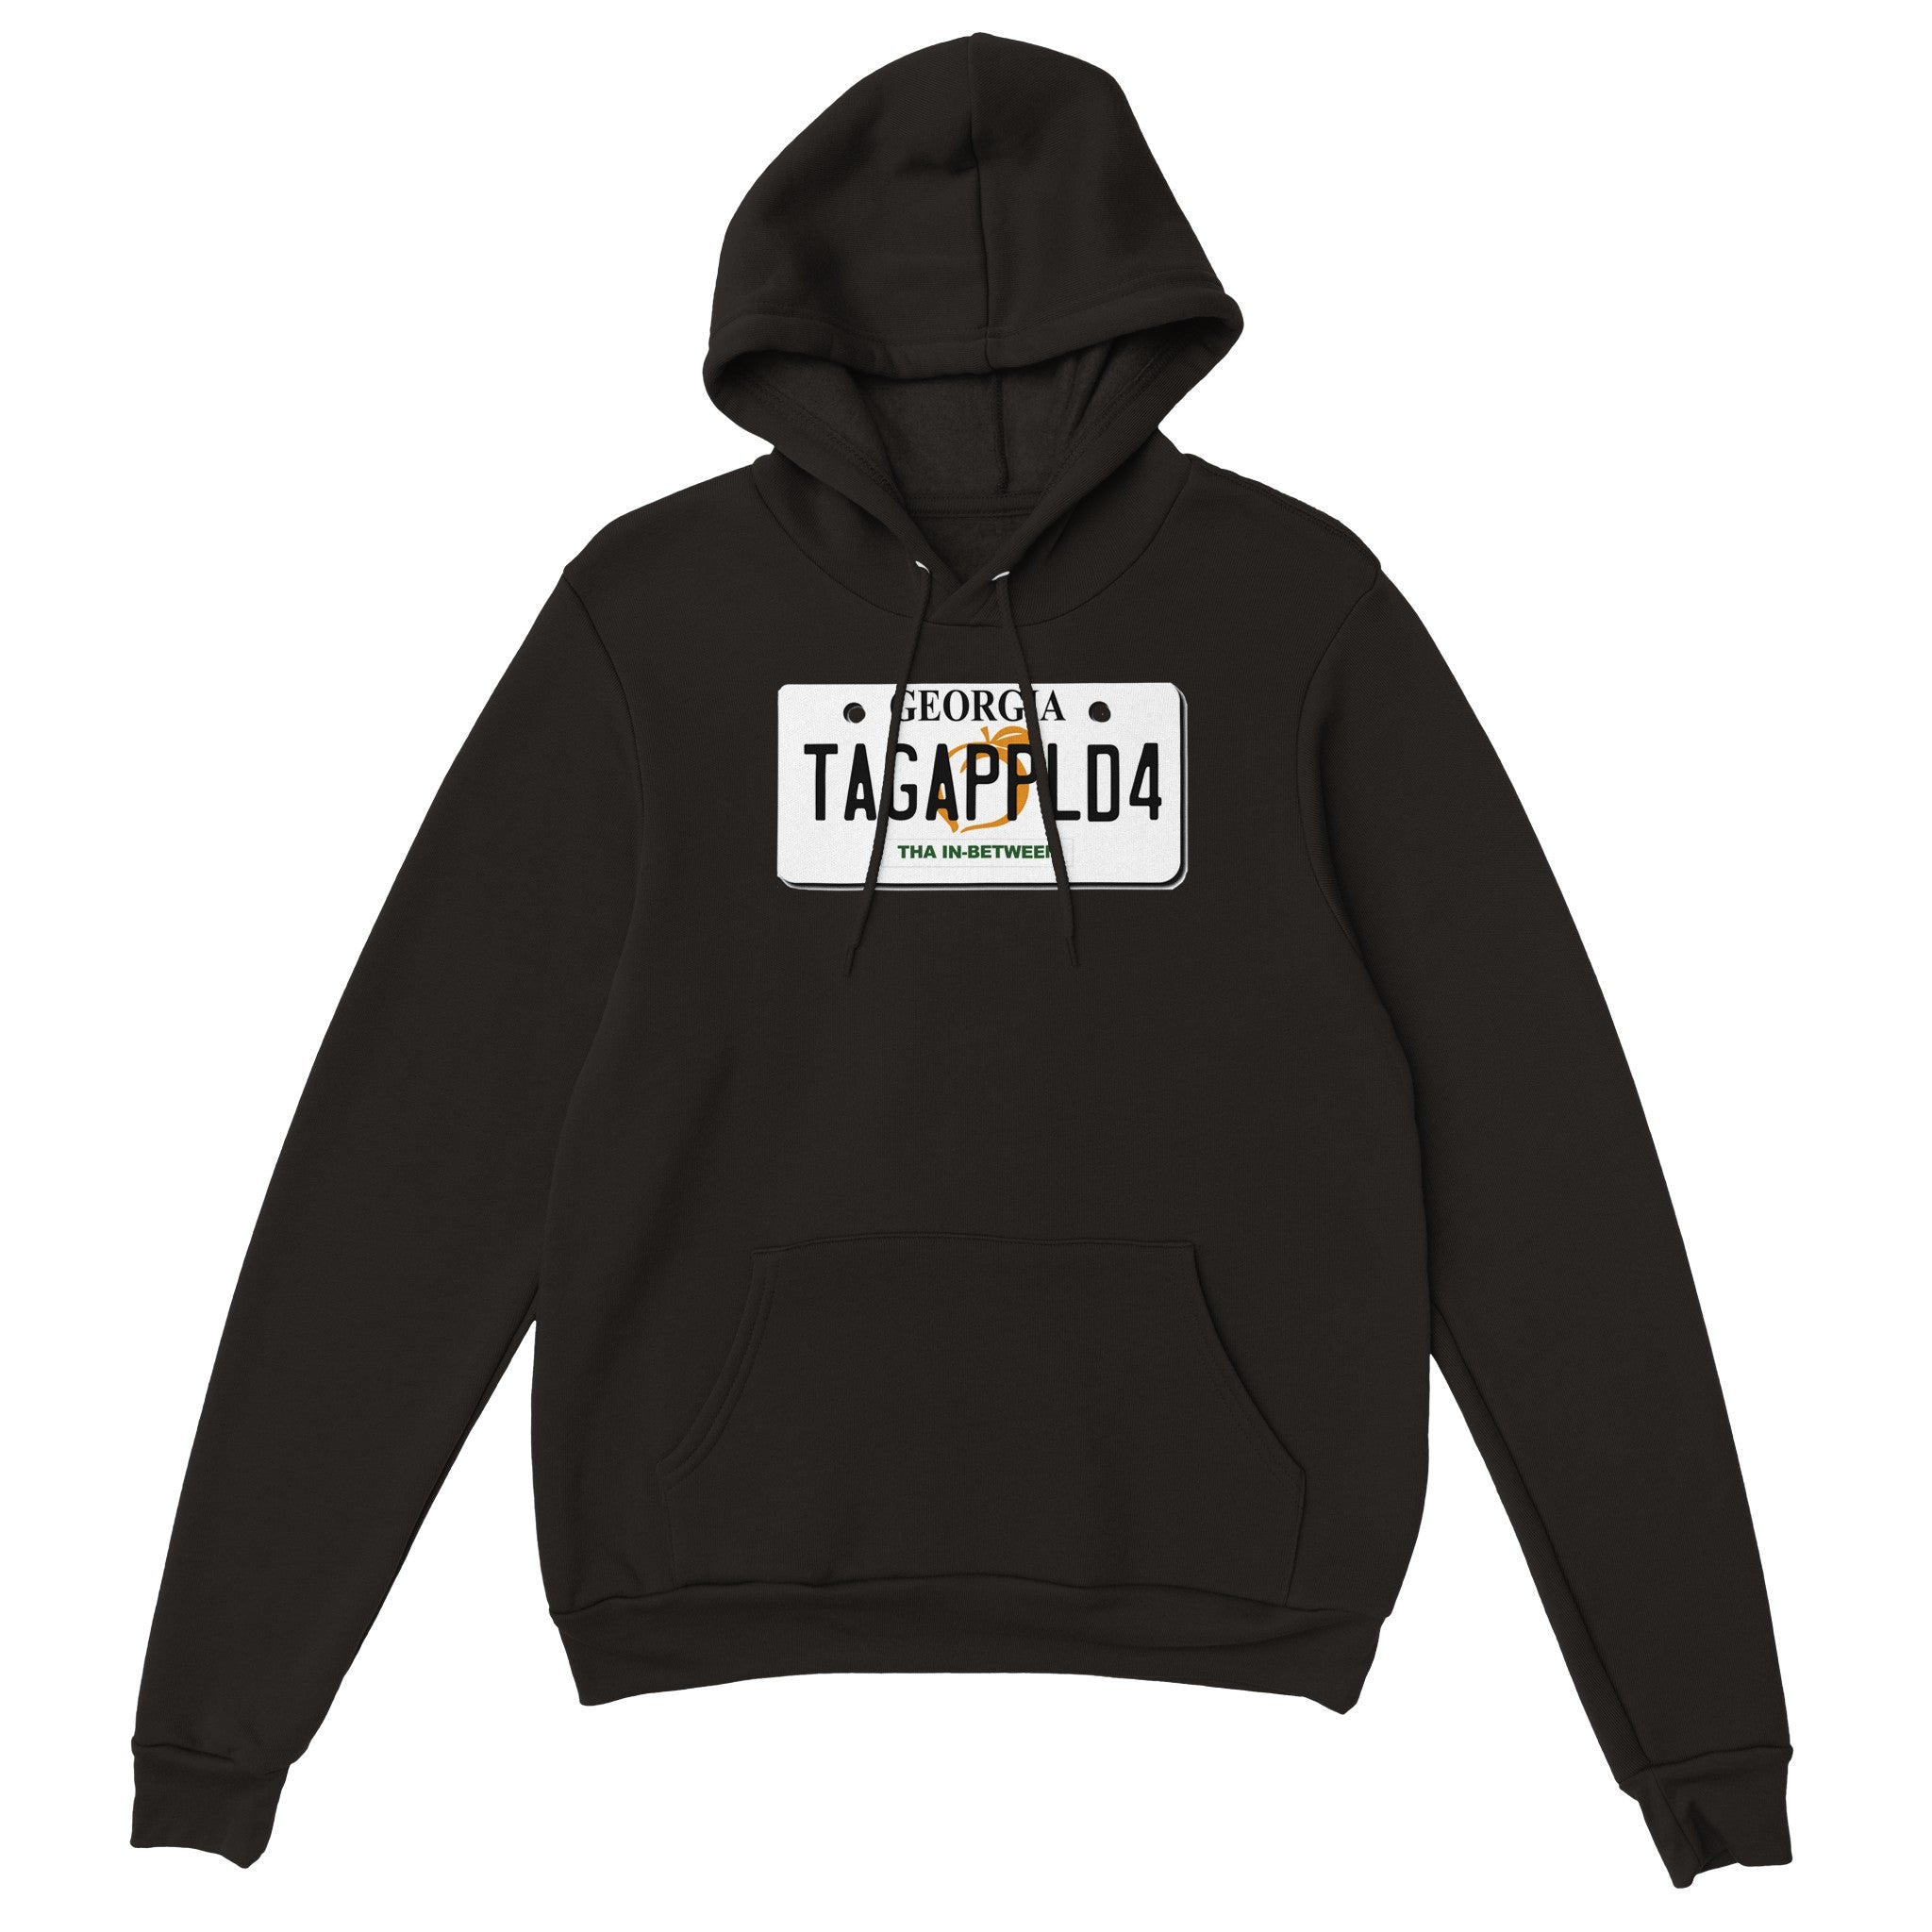 "Tag Applied For" - Premium Unisex Pullover Hoodie